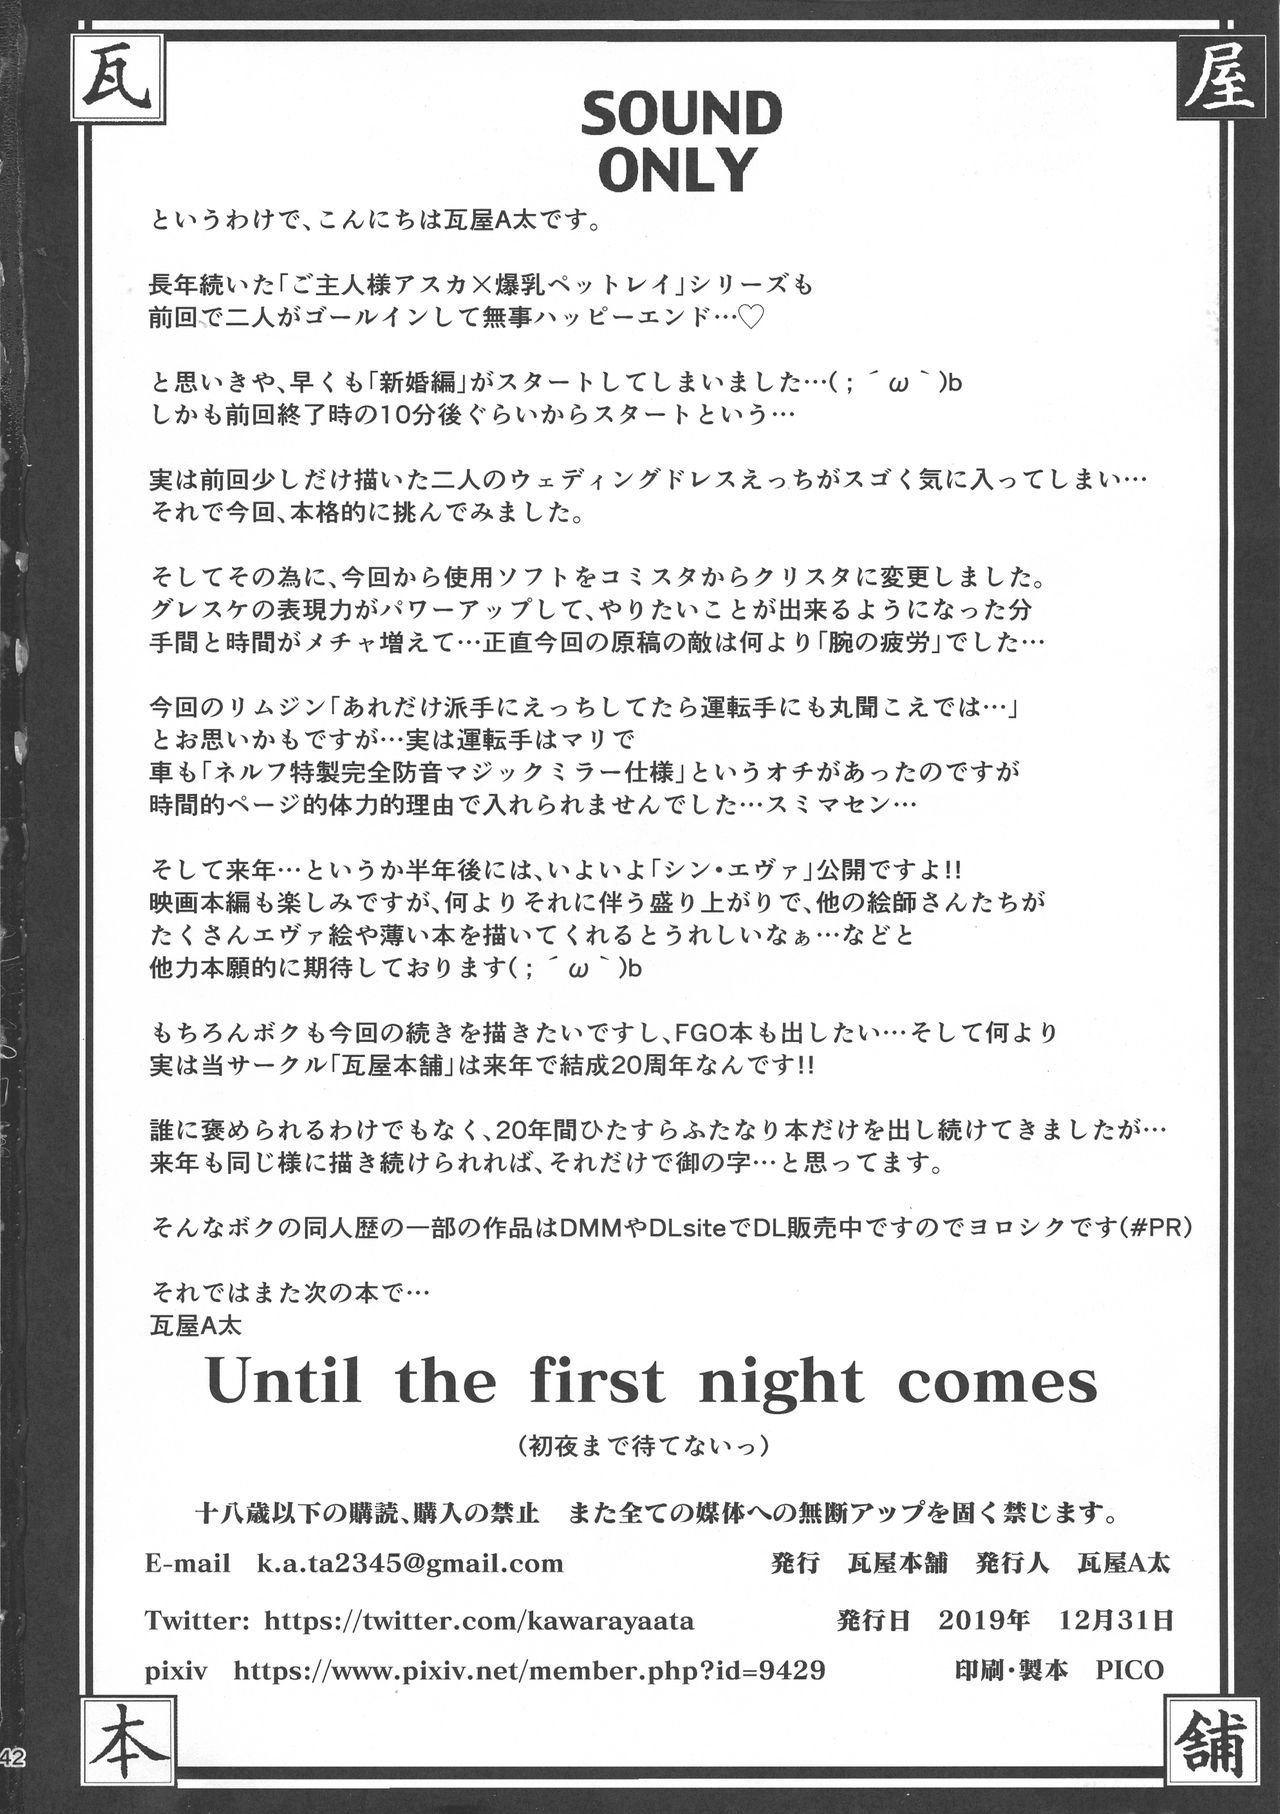 Until the first night comes - 42